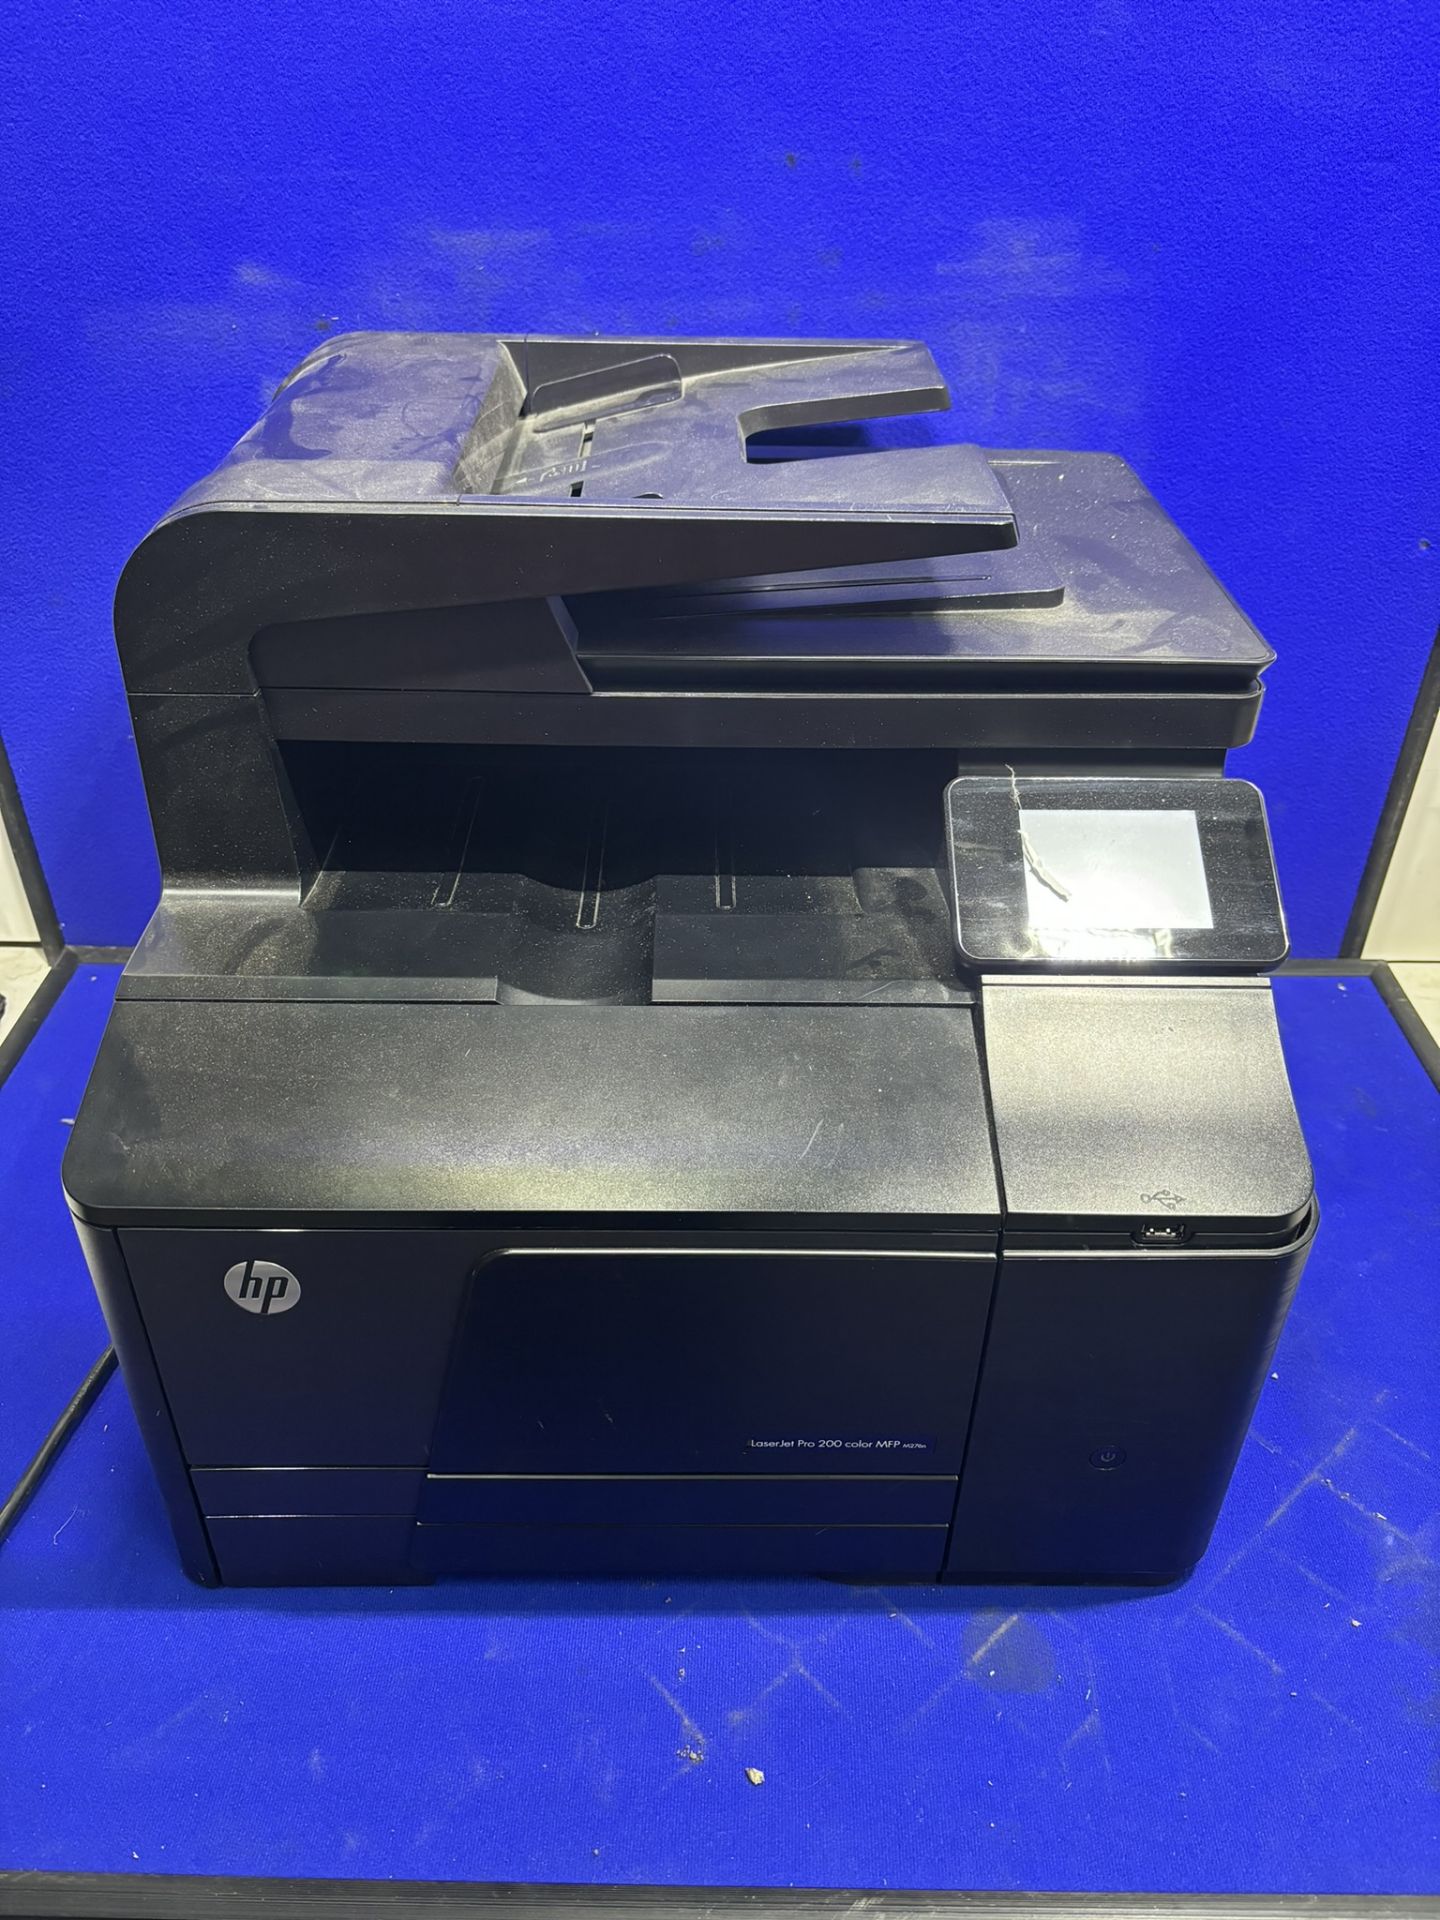 HP Laserjet Pro 200 M276nw All-in-One Color Printer - Image 2 of 12